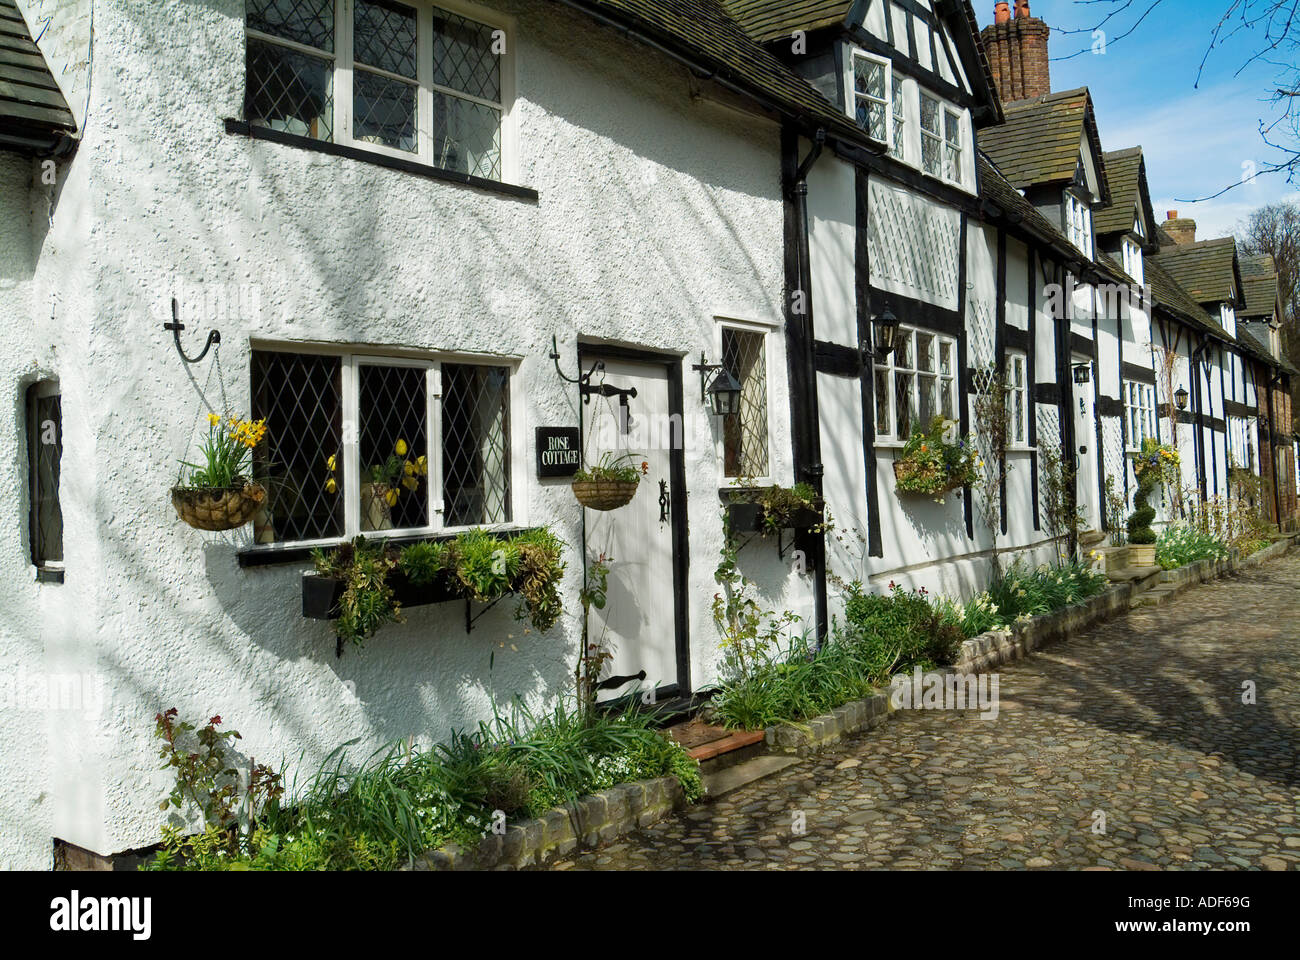 Row of period half timbered cottages in the village of Great Budworth near Northwich in Cheshire England UK Britain Stock Photo